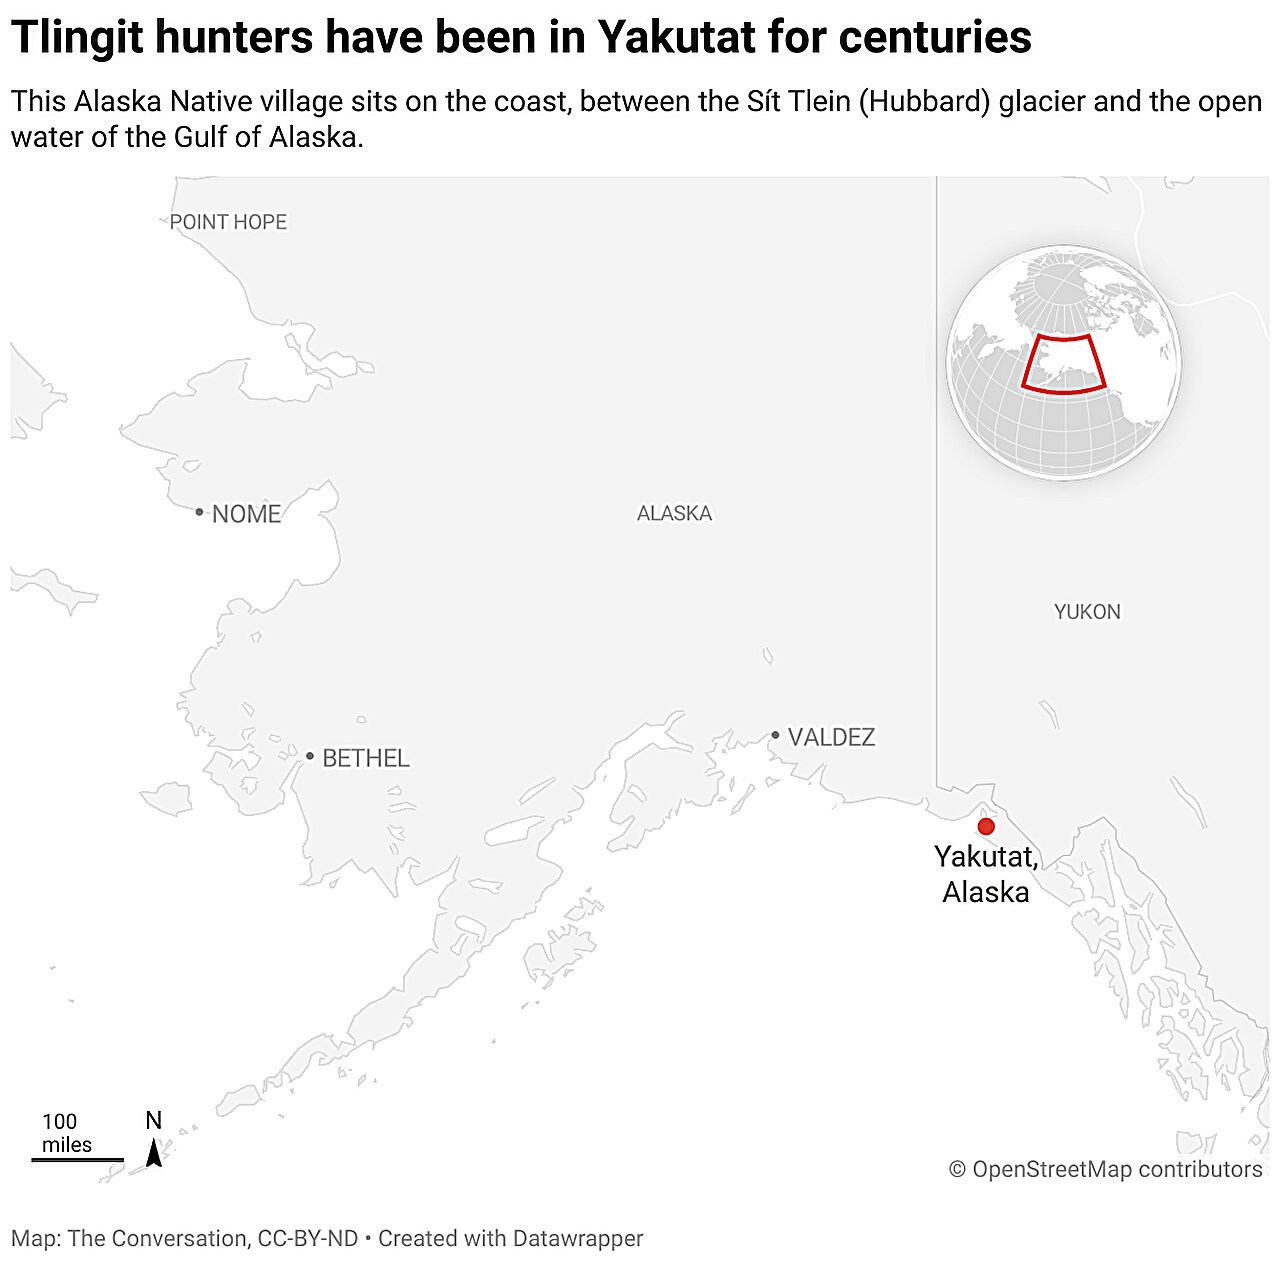 Scientists and Indigenous leaders team up to conserve seals and an ancestral way of life at Yakutat, Alaska